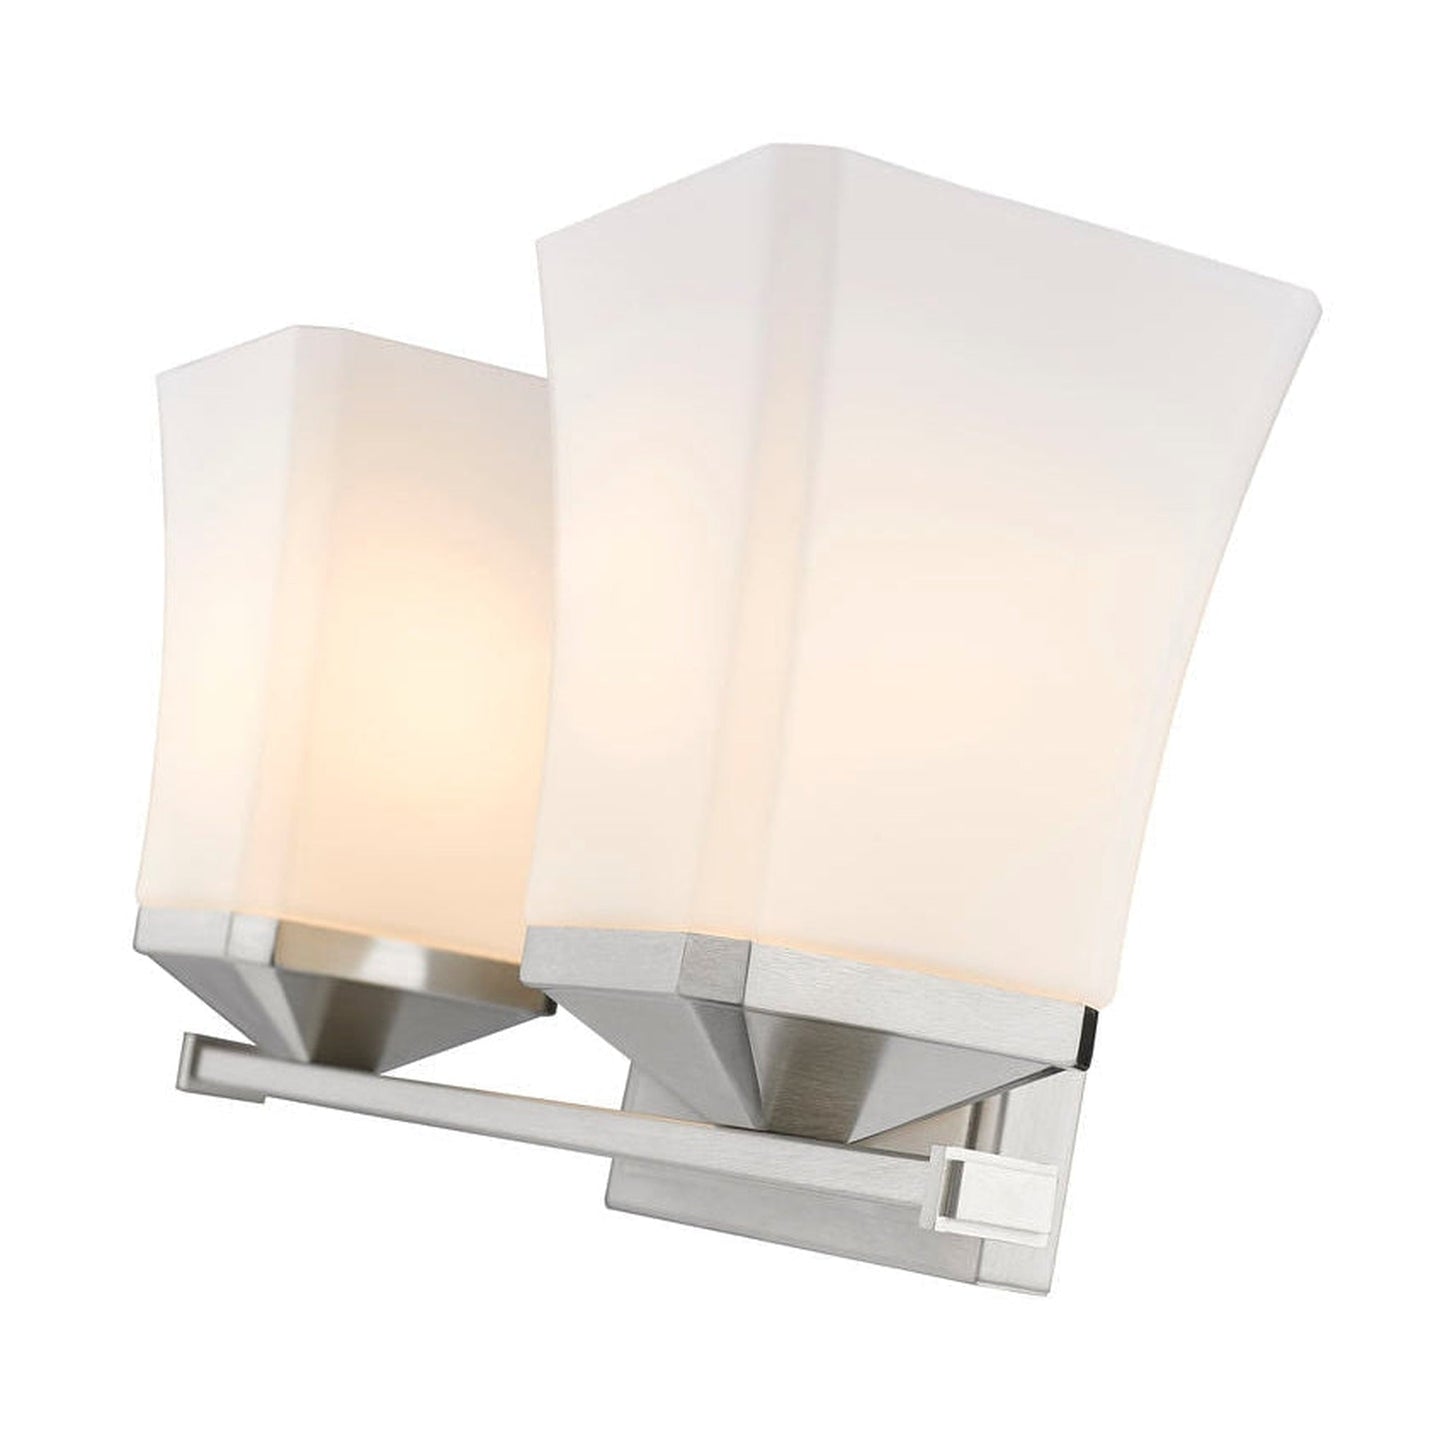 Z-Lite Darcy 16" 2-Light Brushed Nickel Vanity Light With Etched Opal Glass Shade